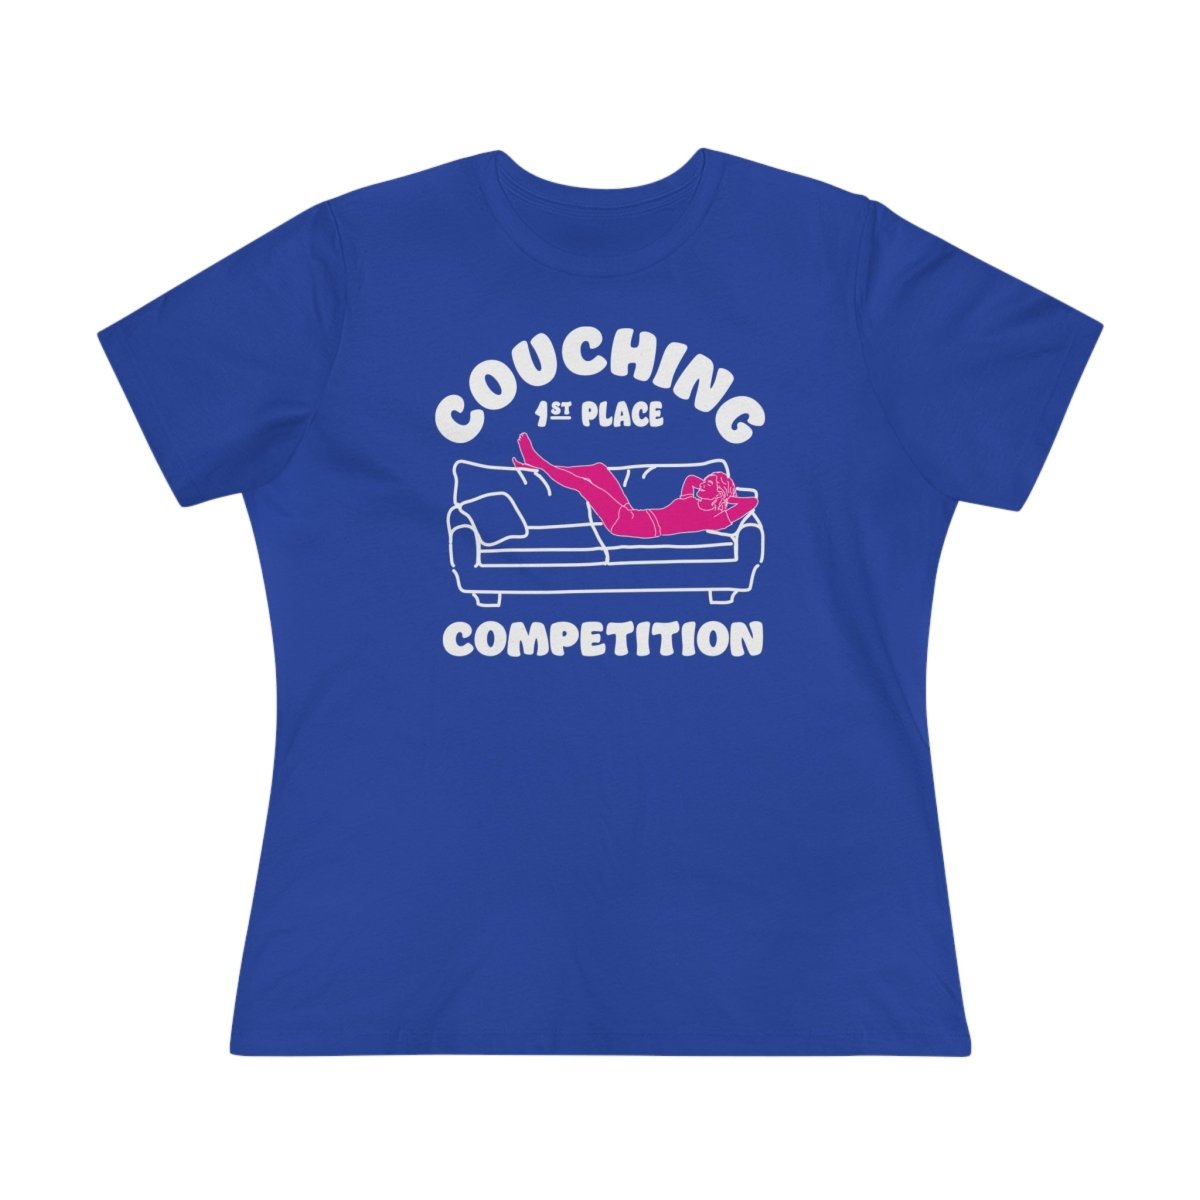 Couching Women's Premium Relaxed Fit T-Shirt, Recharge Competition, Inspire Relaxation, Weekend, Couch Potato